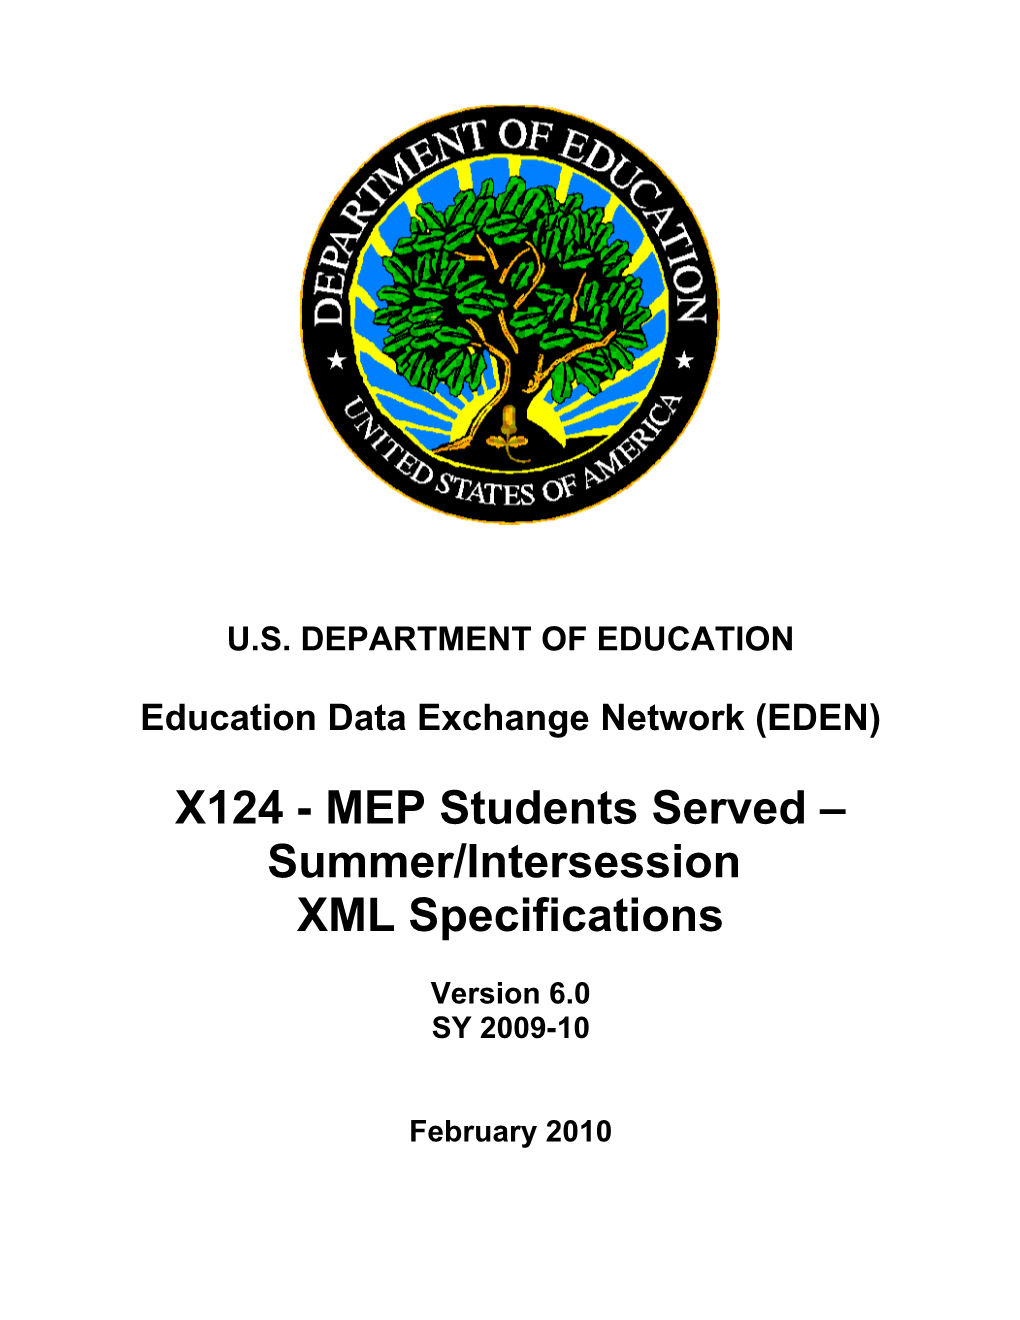 MEP Students Served Summer/Intersession XML Specifications